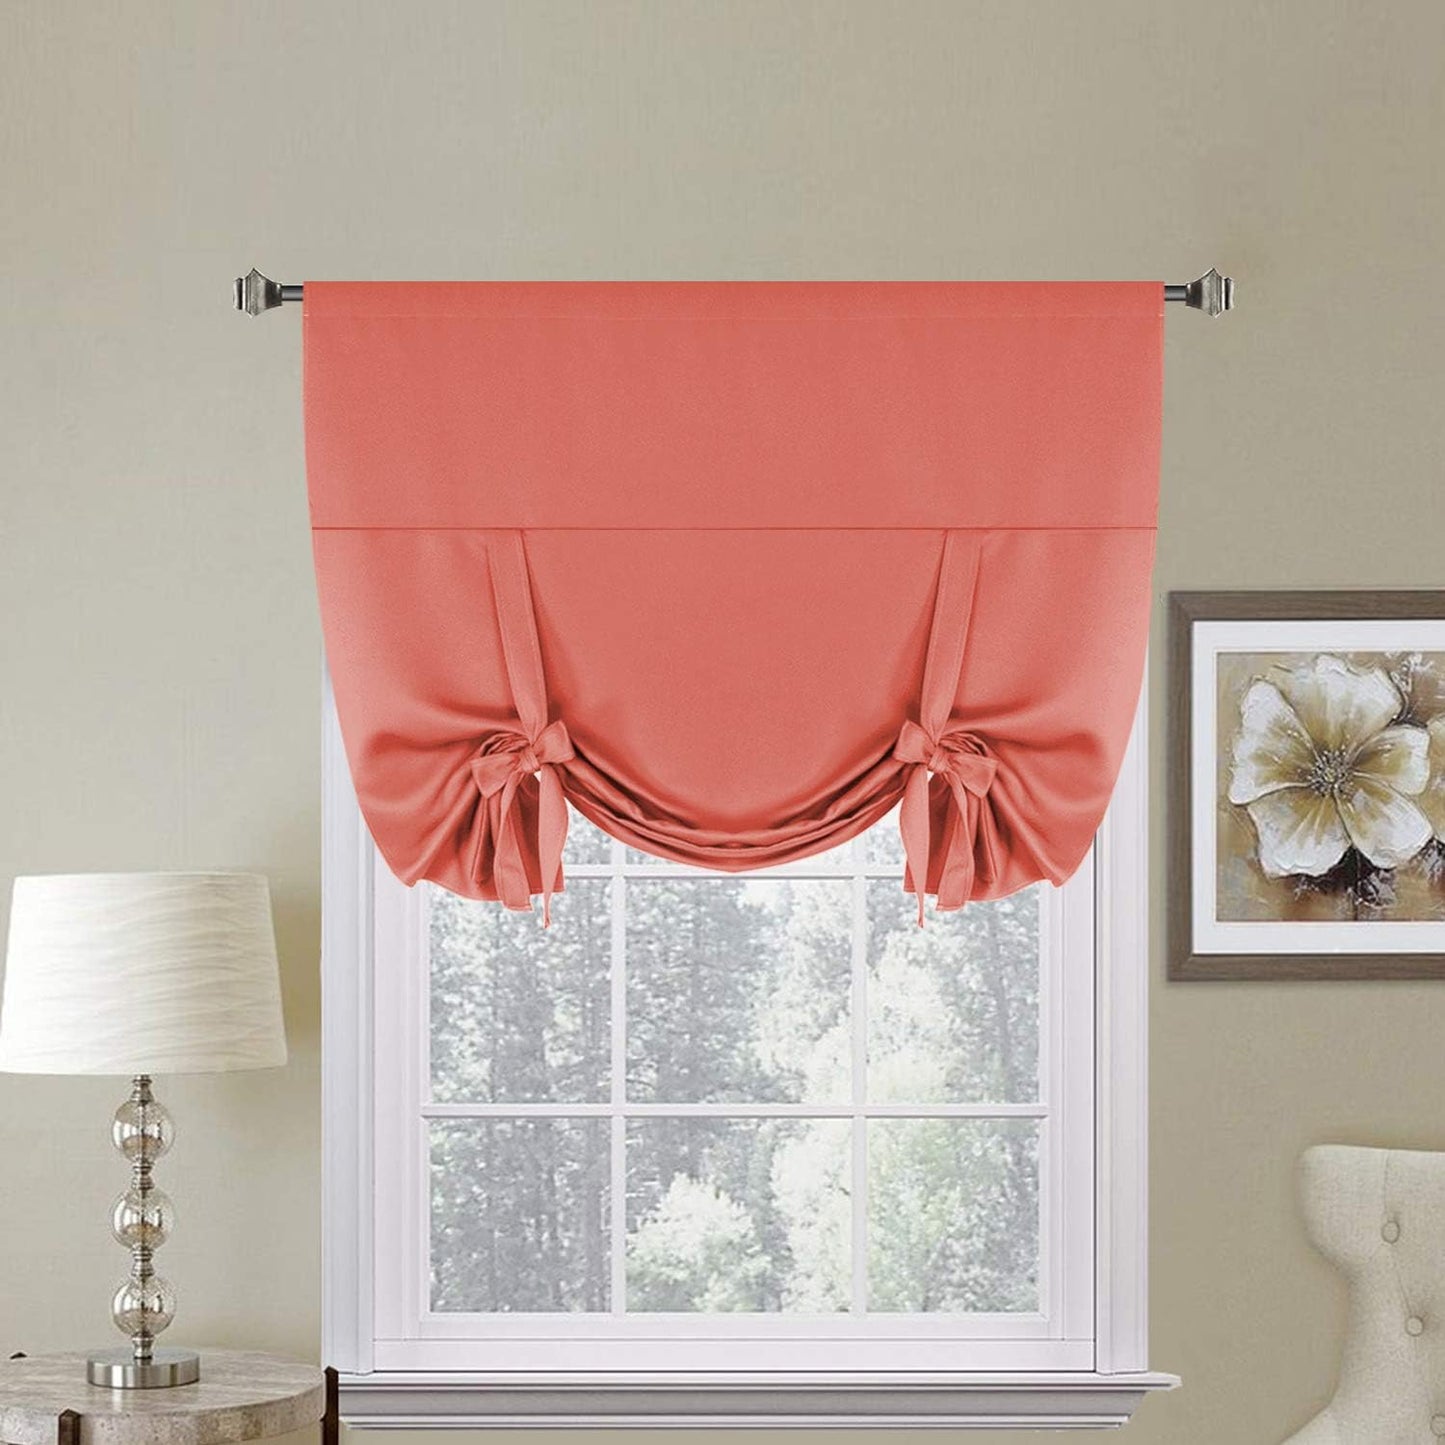 H.VERSAILTEX Tie up Curtain Thermal Insulated Room Darkening Rod Pocket Valance for Bedroom (Coral, 1 Panel, 42 Inches W X 63 Inches L)  H.VERSAILTEX Coral W42" X L63" 1-Pack 